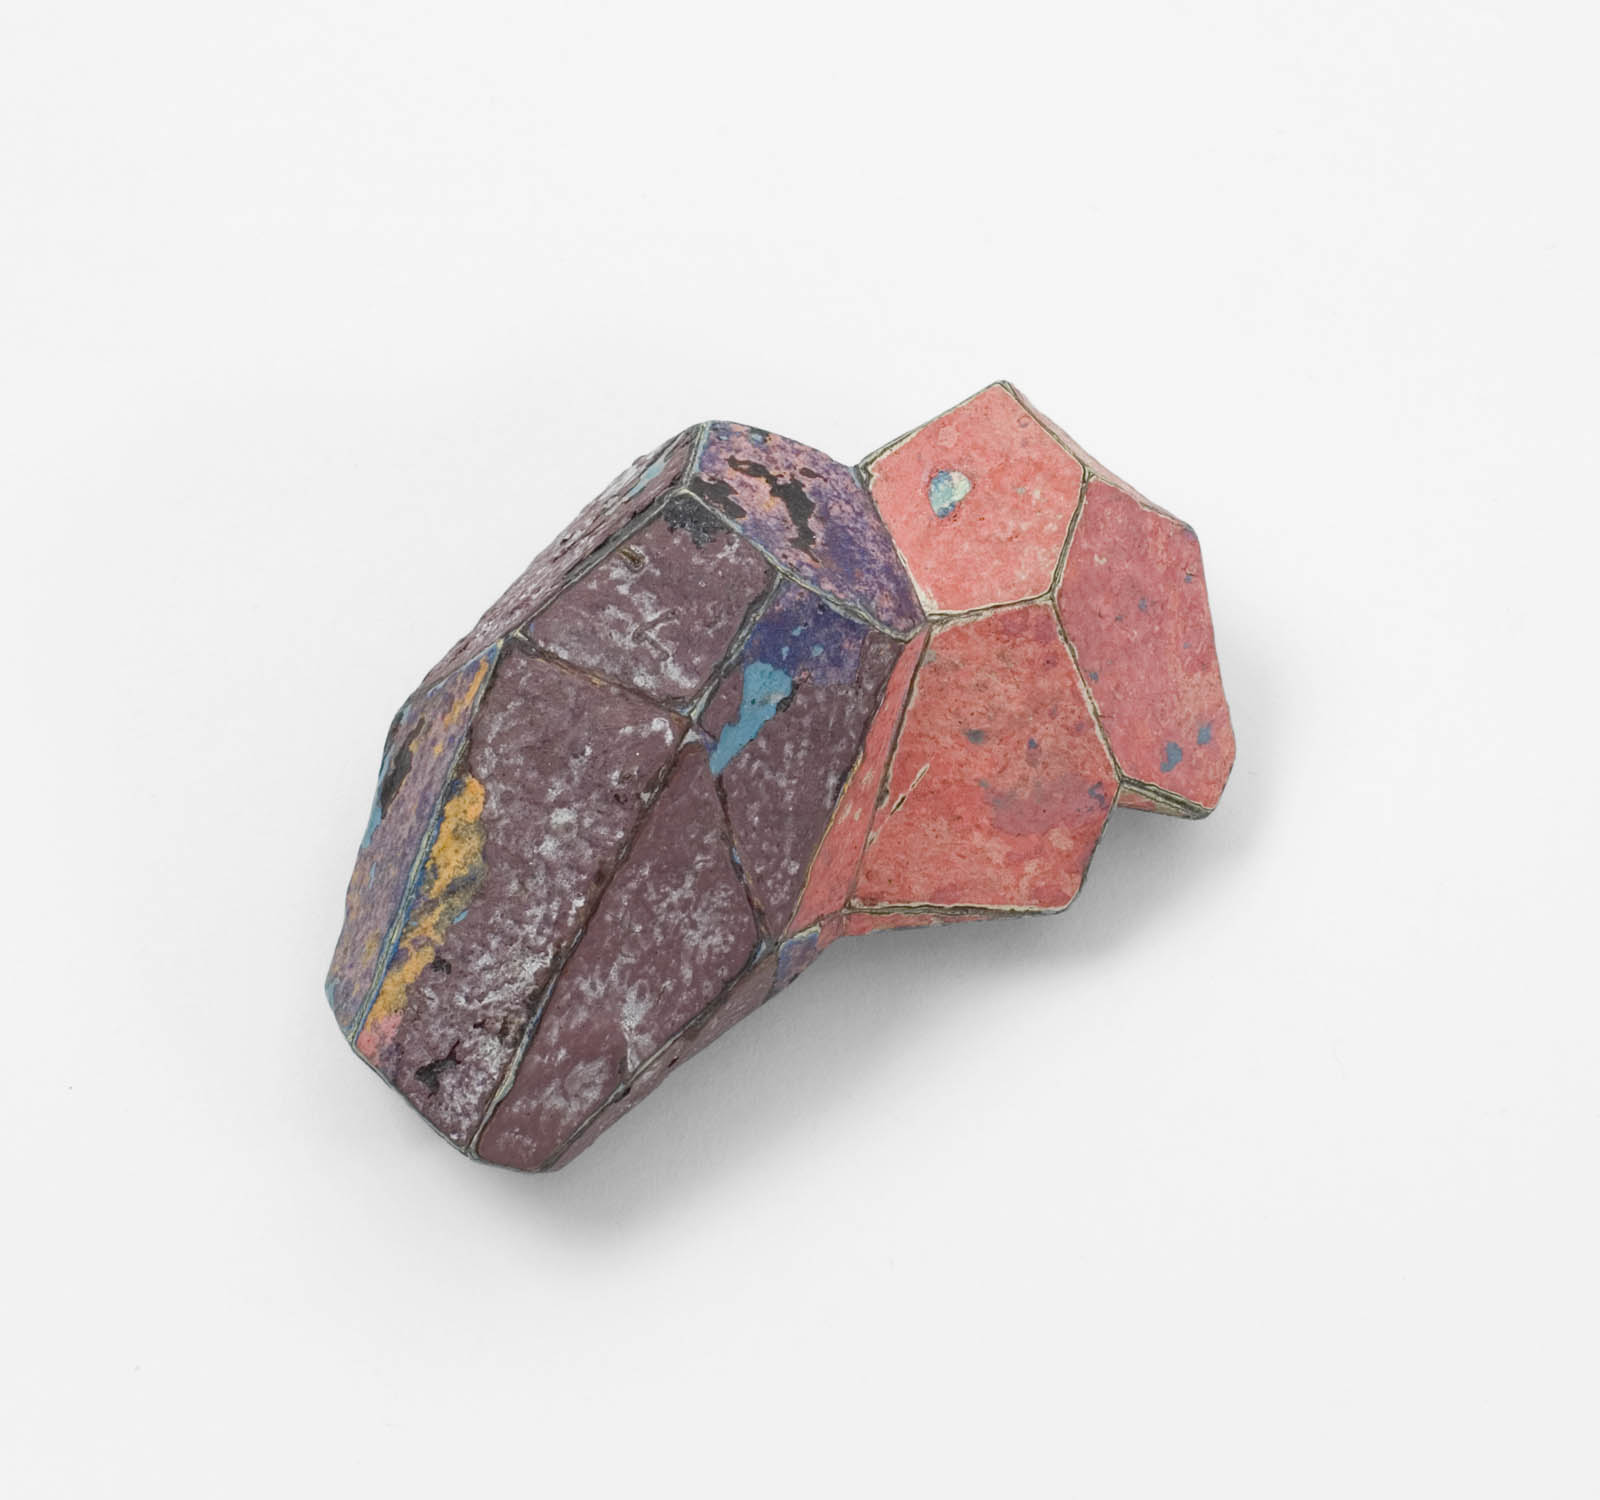 "Stained Purple" I Brooch, 2011 I Graffiti, silver, stainless steel I Photo: Mirei Takeuchi